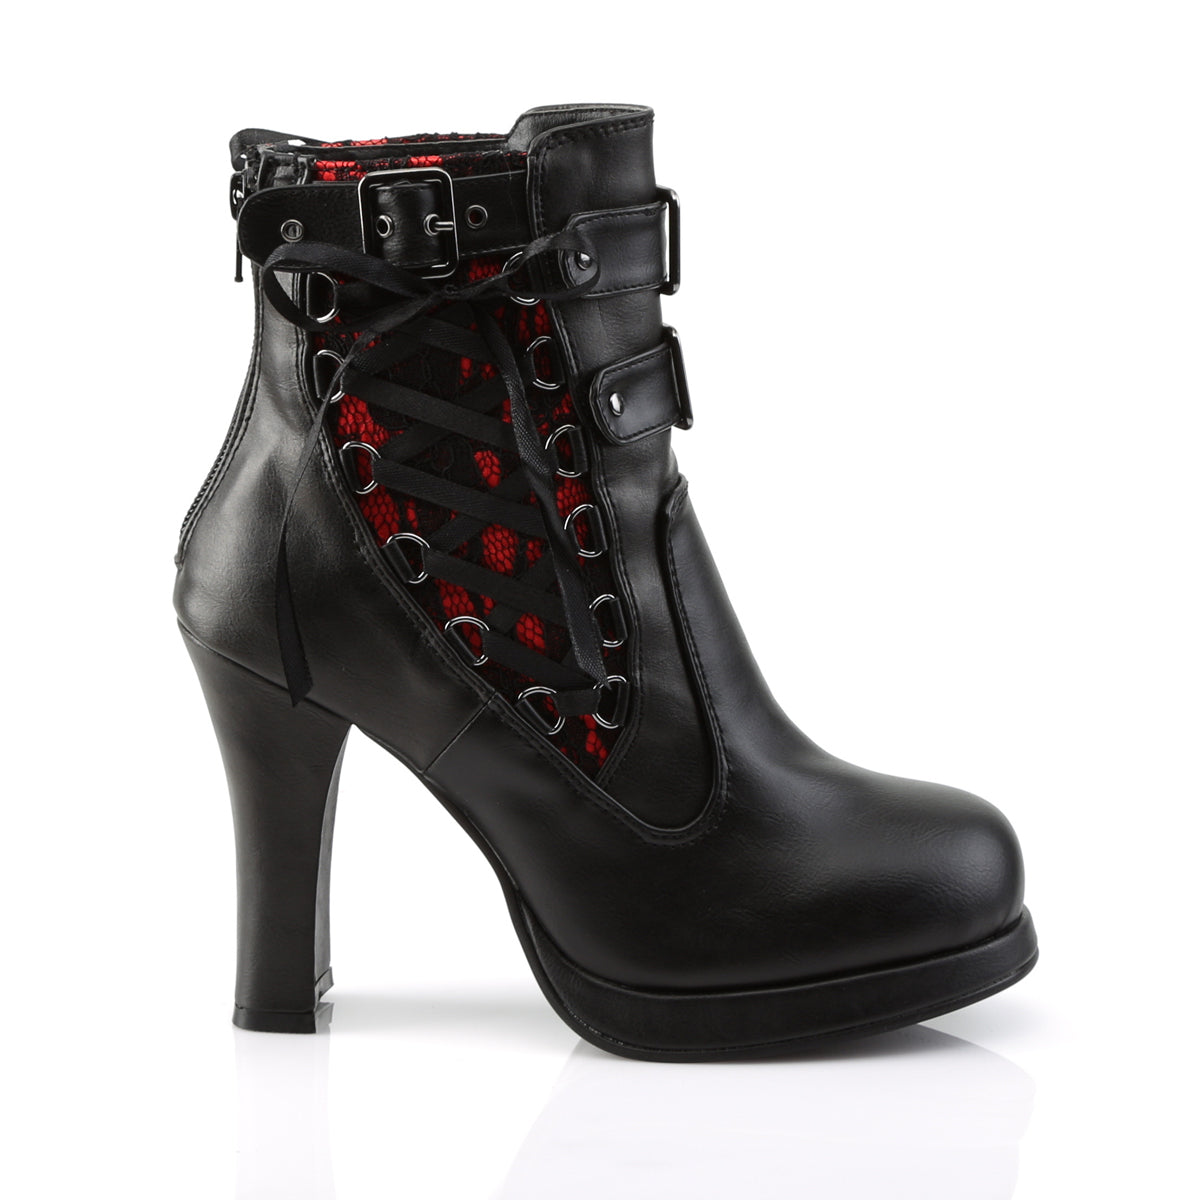 CRYPTO-51 Demonia Black-Red Lace Vegan Leather Women's Ankle Boots [Demonia Cult Alternative Footwear]